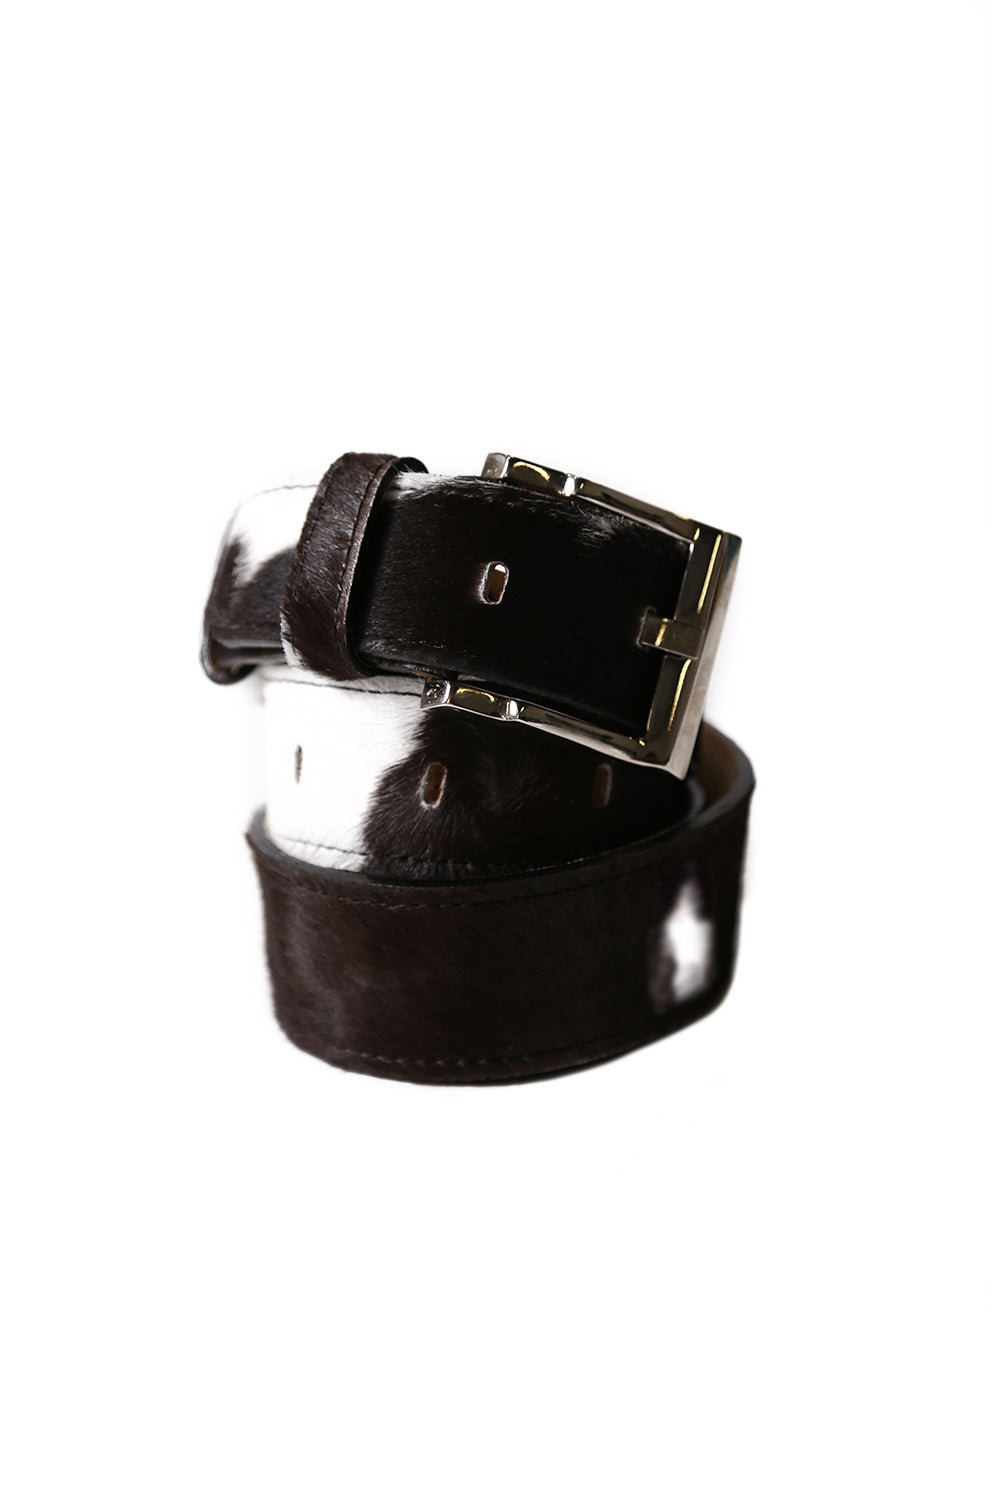 Jeans Belt Black & White Cowhide Leather